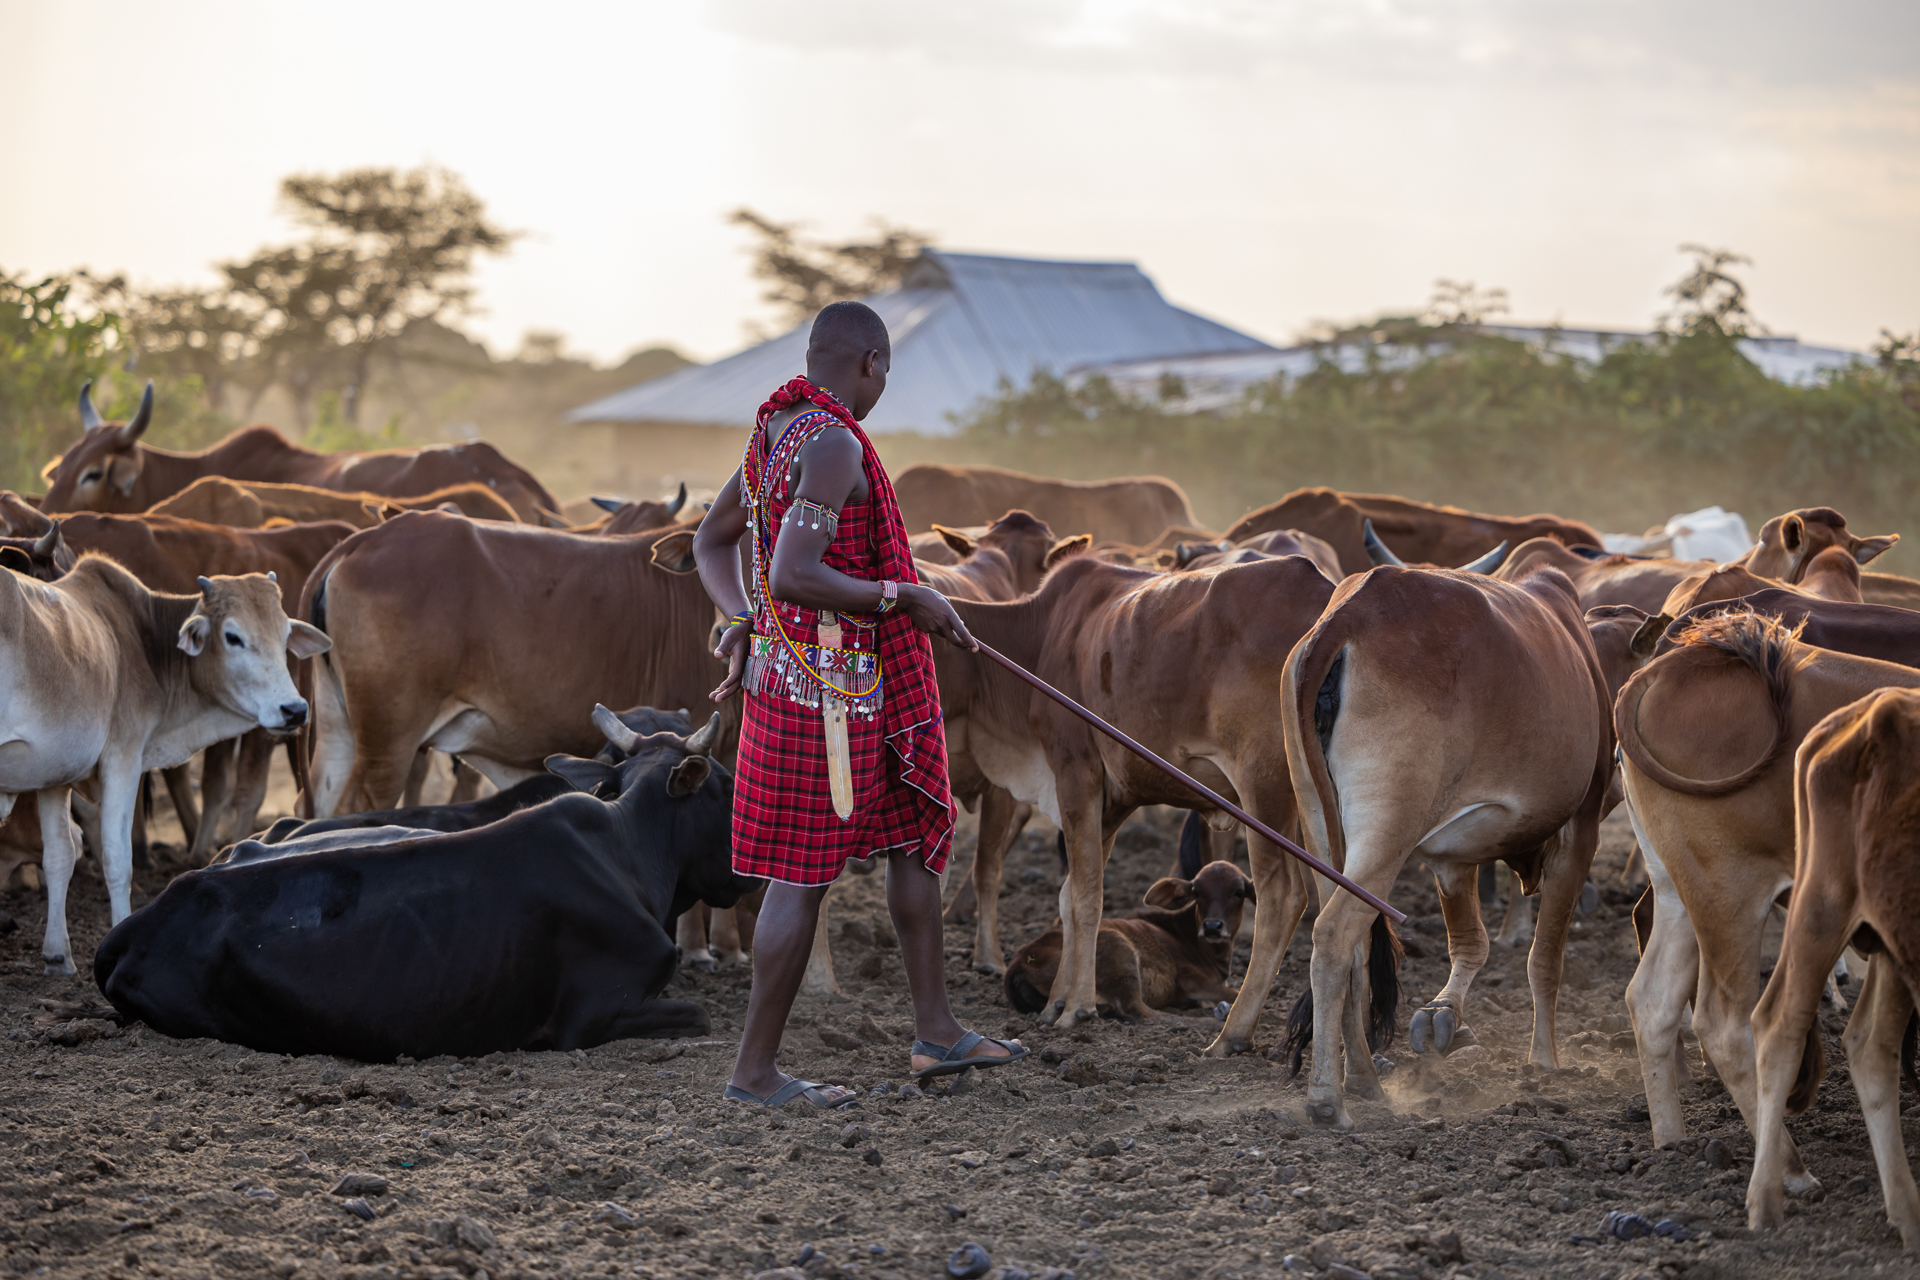 Above: A Maasai man tends to his cattle